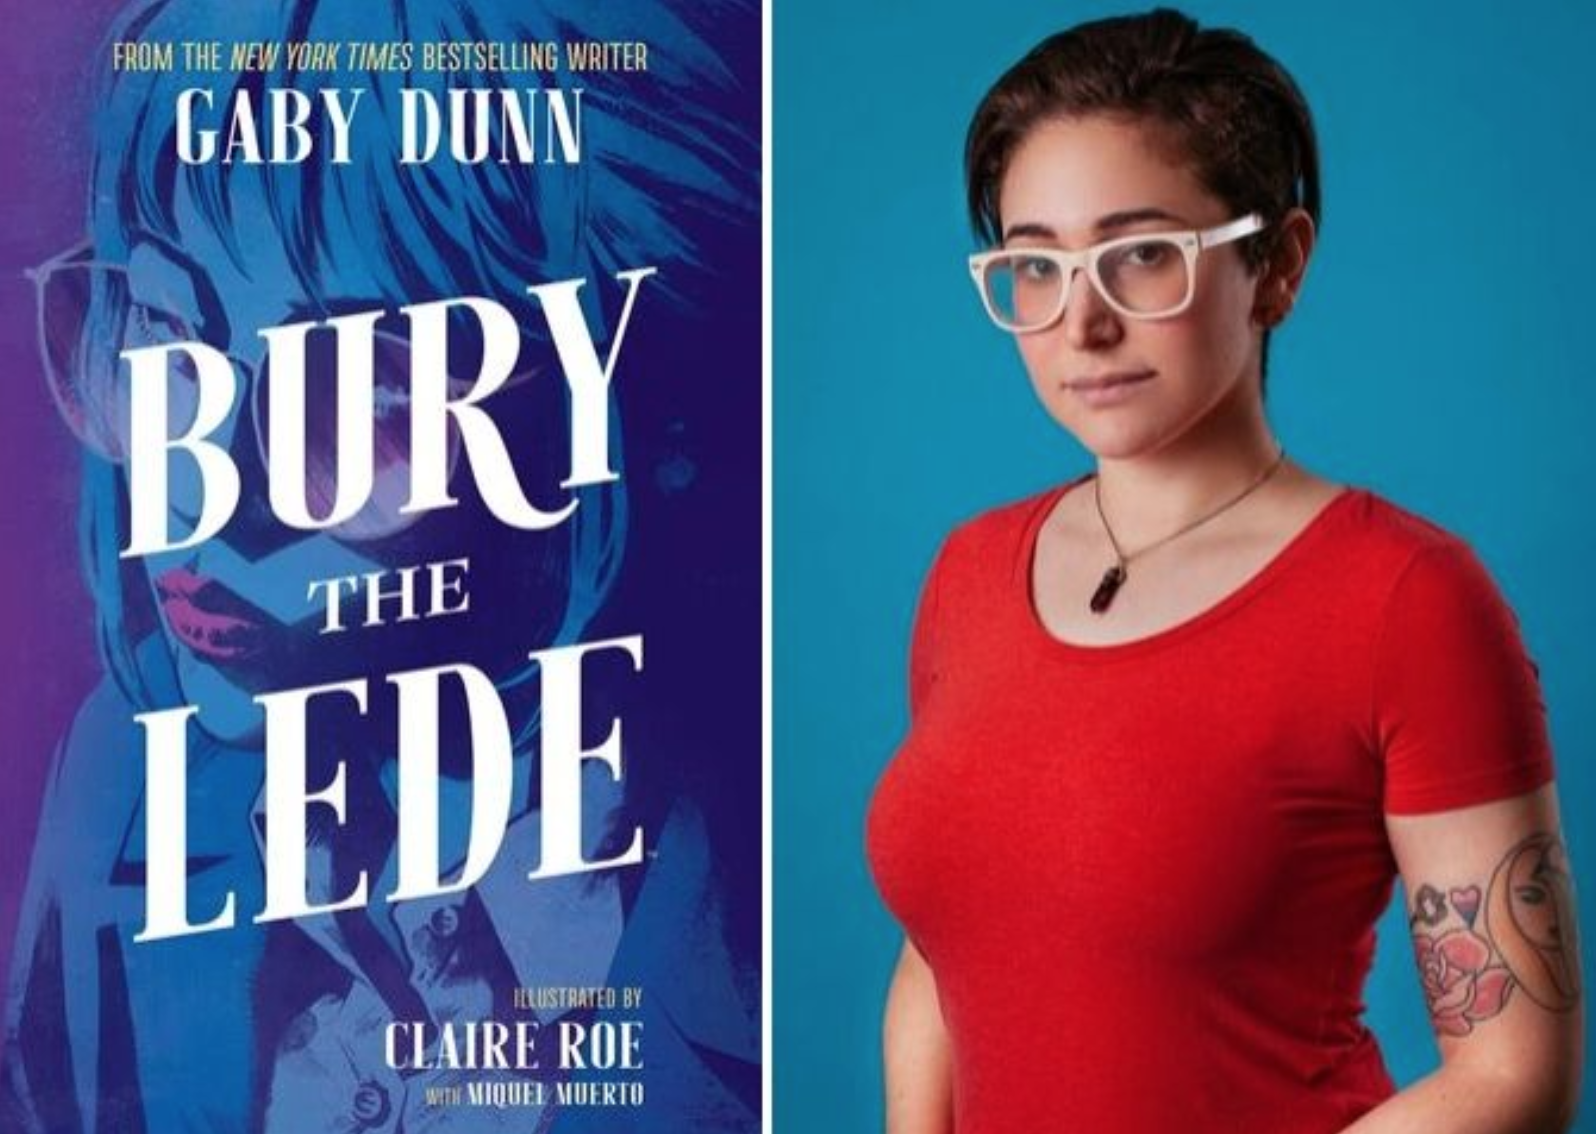 5 Reasons You Should Read Gaby Dunn's "Bury the Lede" -